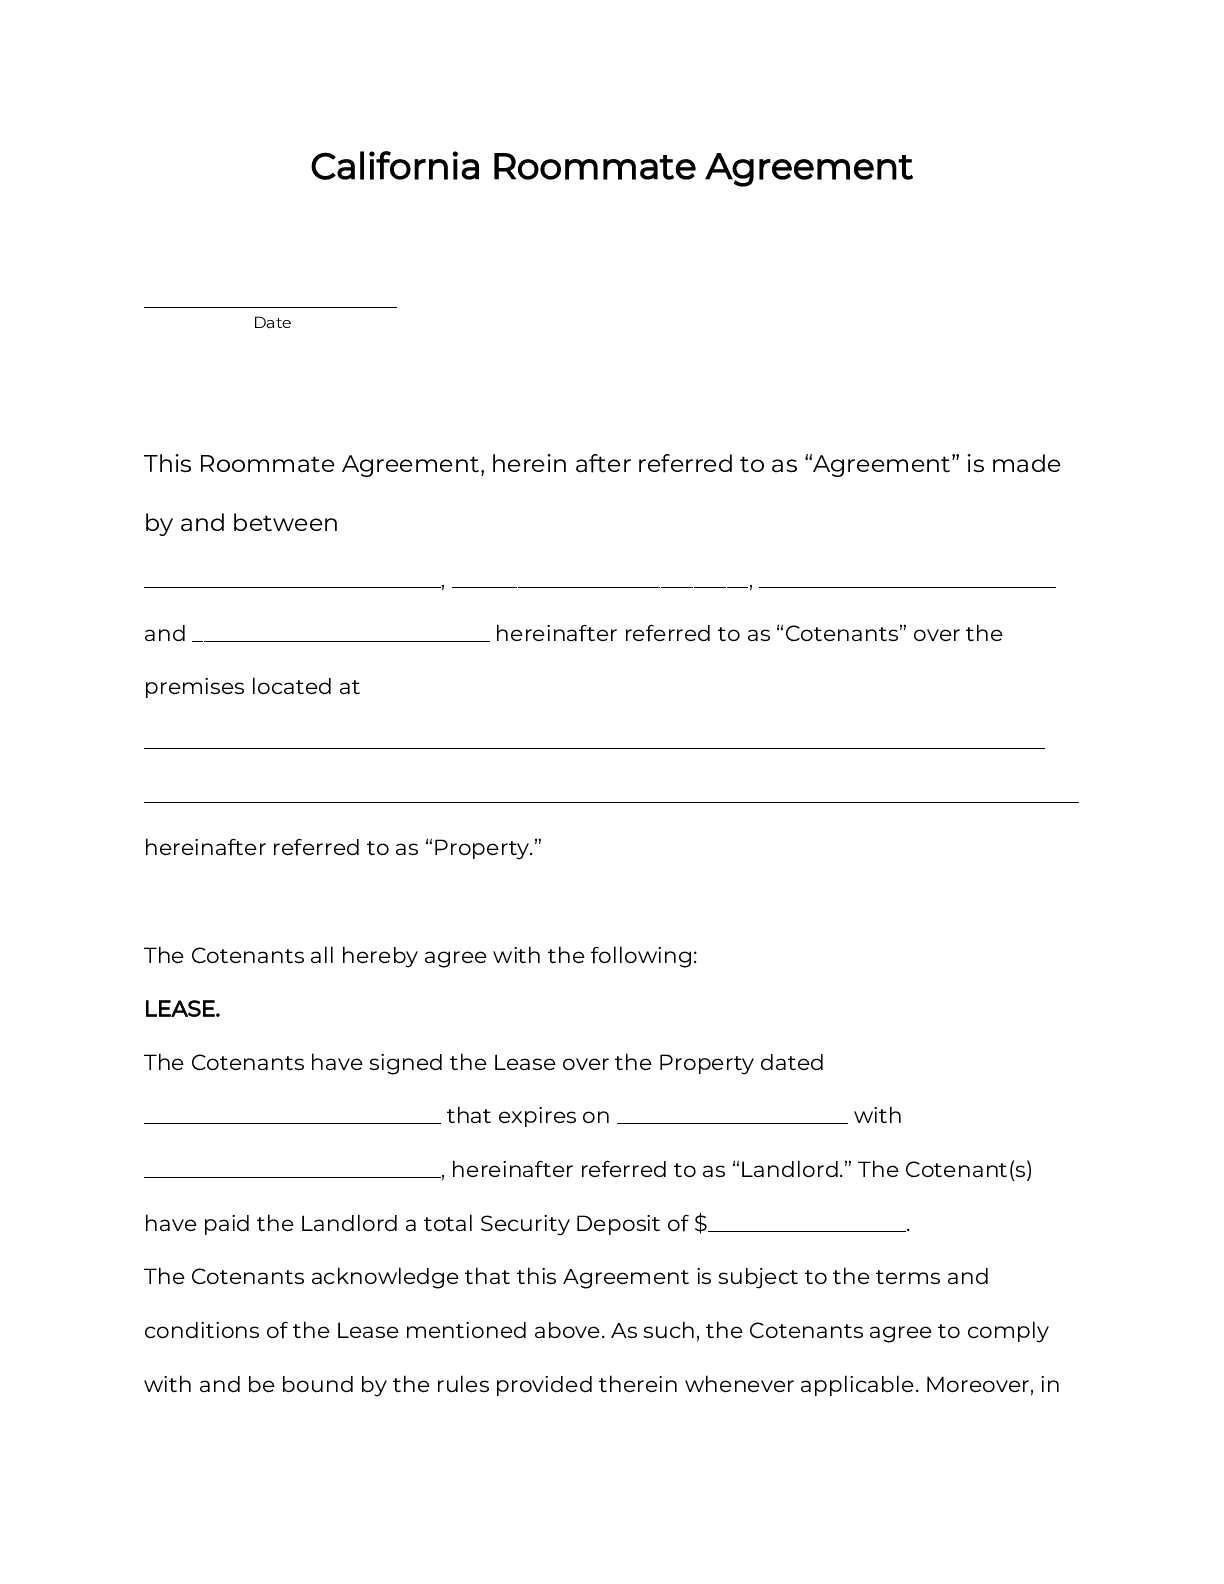 Official California Room Rental Agreement Roommate Form 2021 Pdf